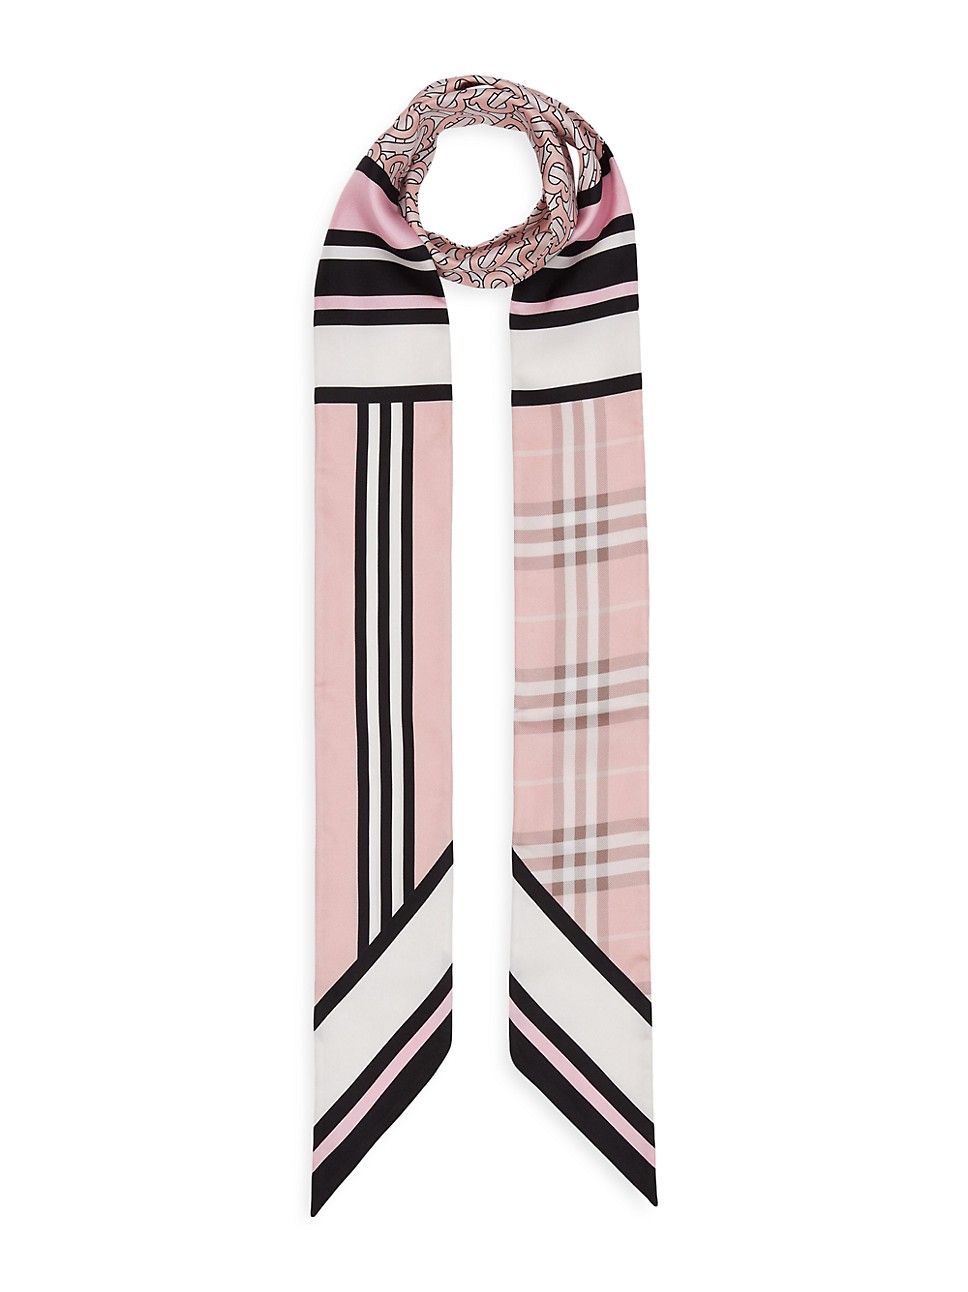 Burberry


Triple Check Silk Skinny Scarf



4.6 out of 5 Customer Rating | Saks Fifth Avenue